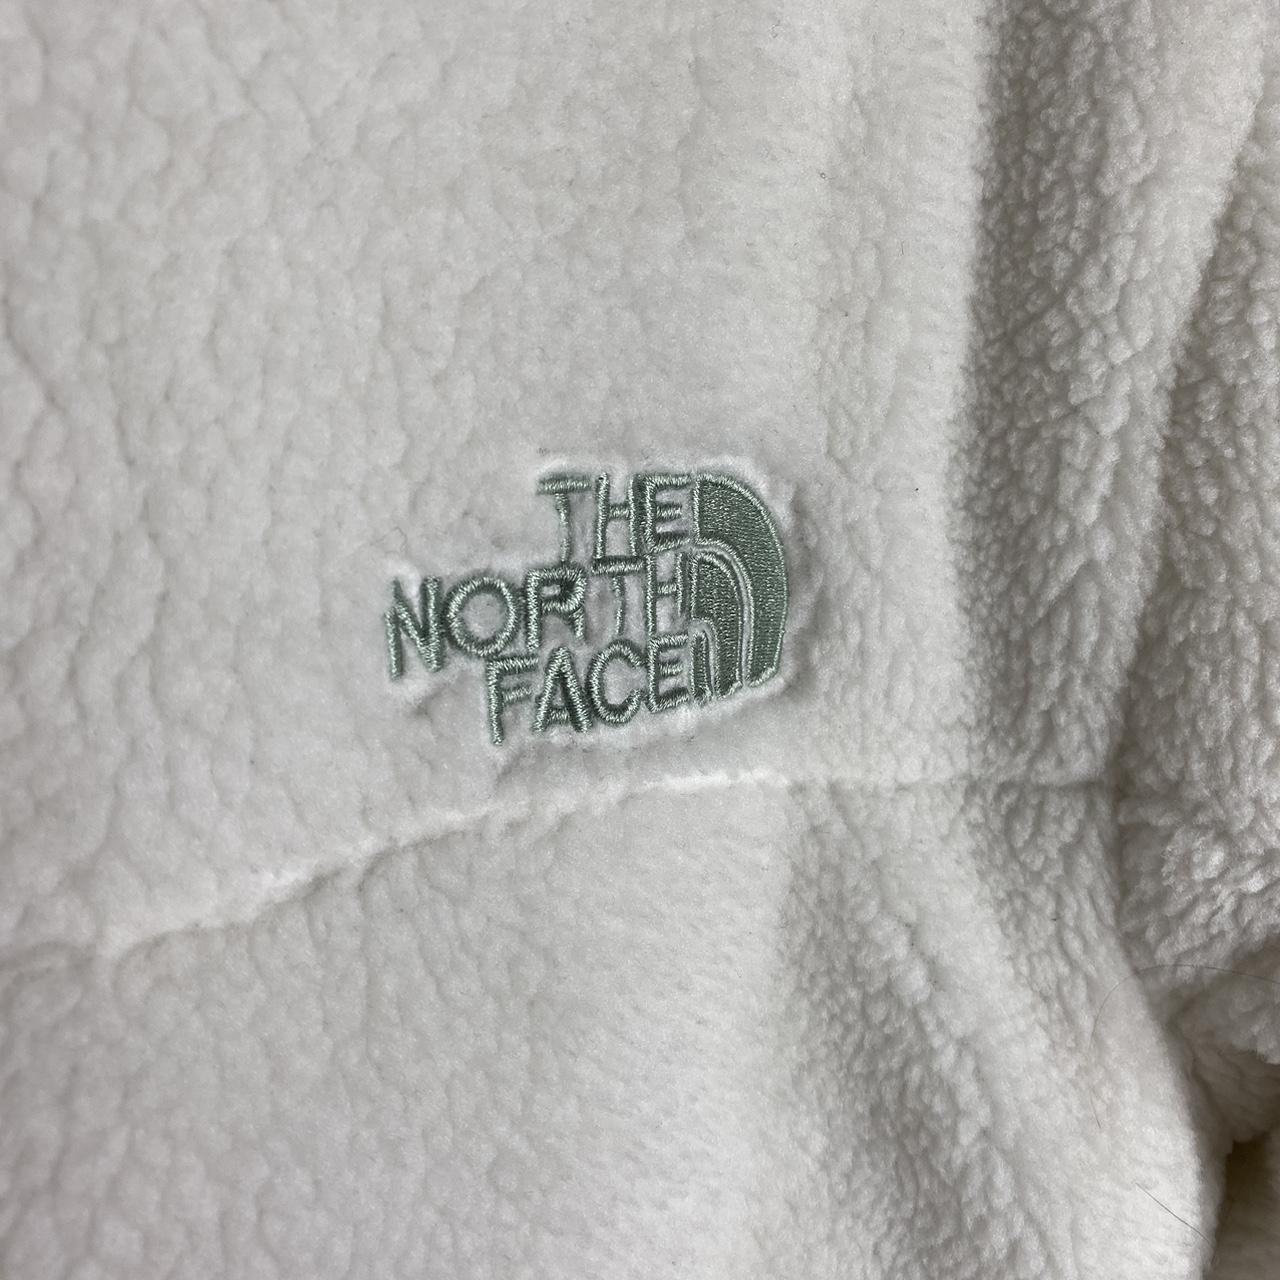 The North Face Women's White and Green Jacket (2)